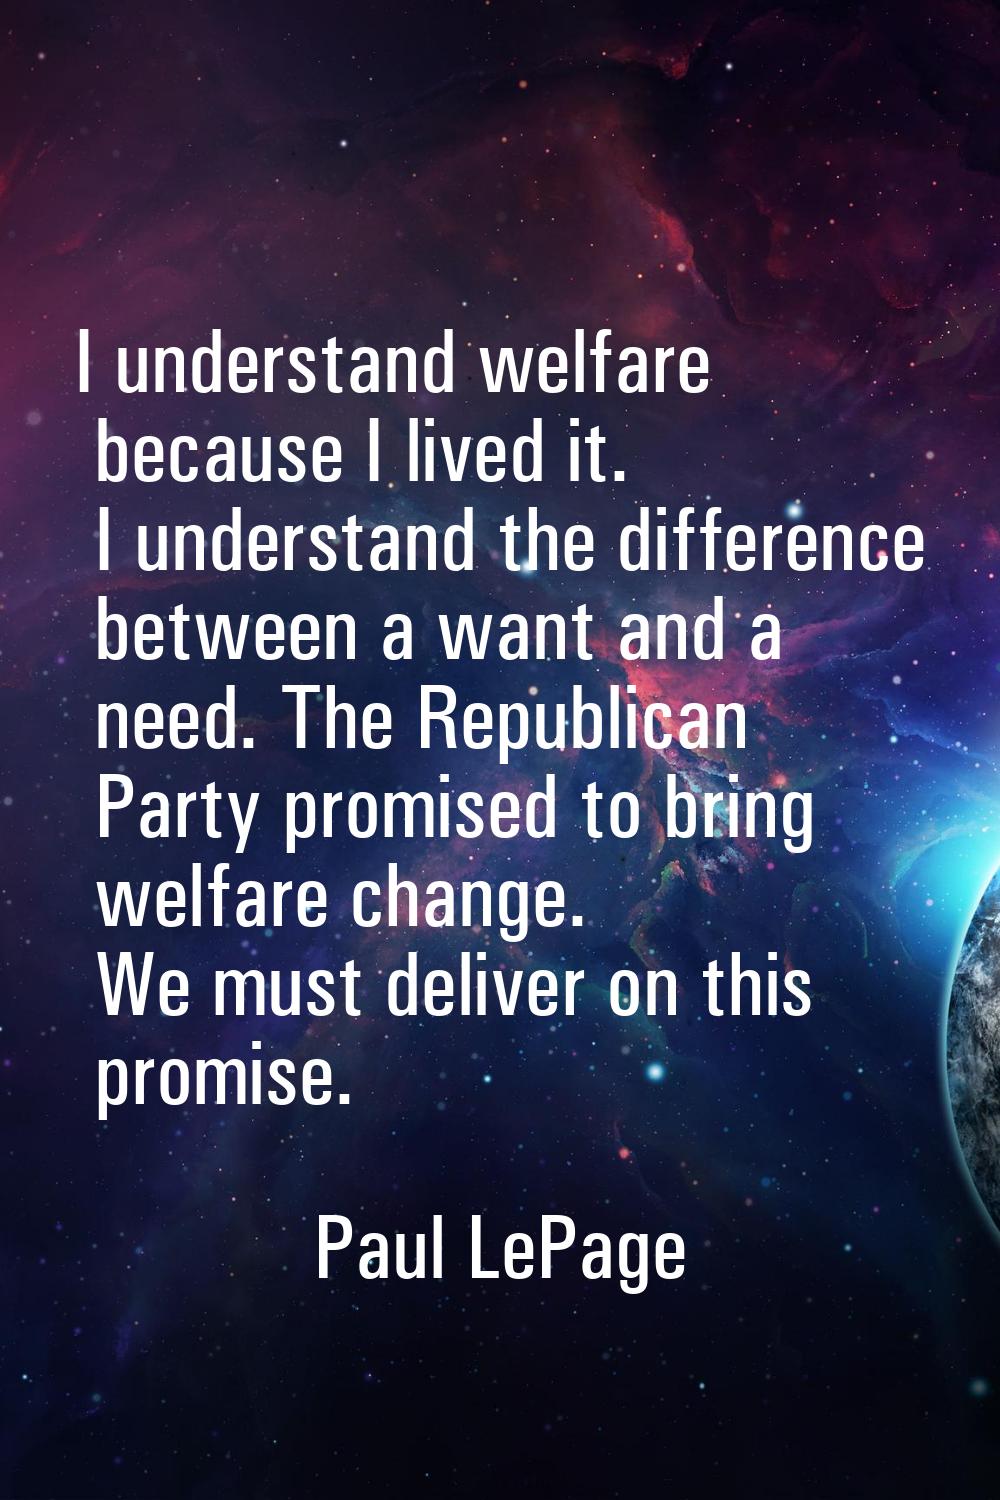 I understand welfare because I lived it. I understand the difference between a want and a need. The